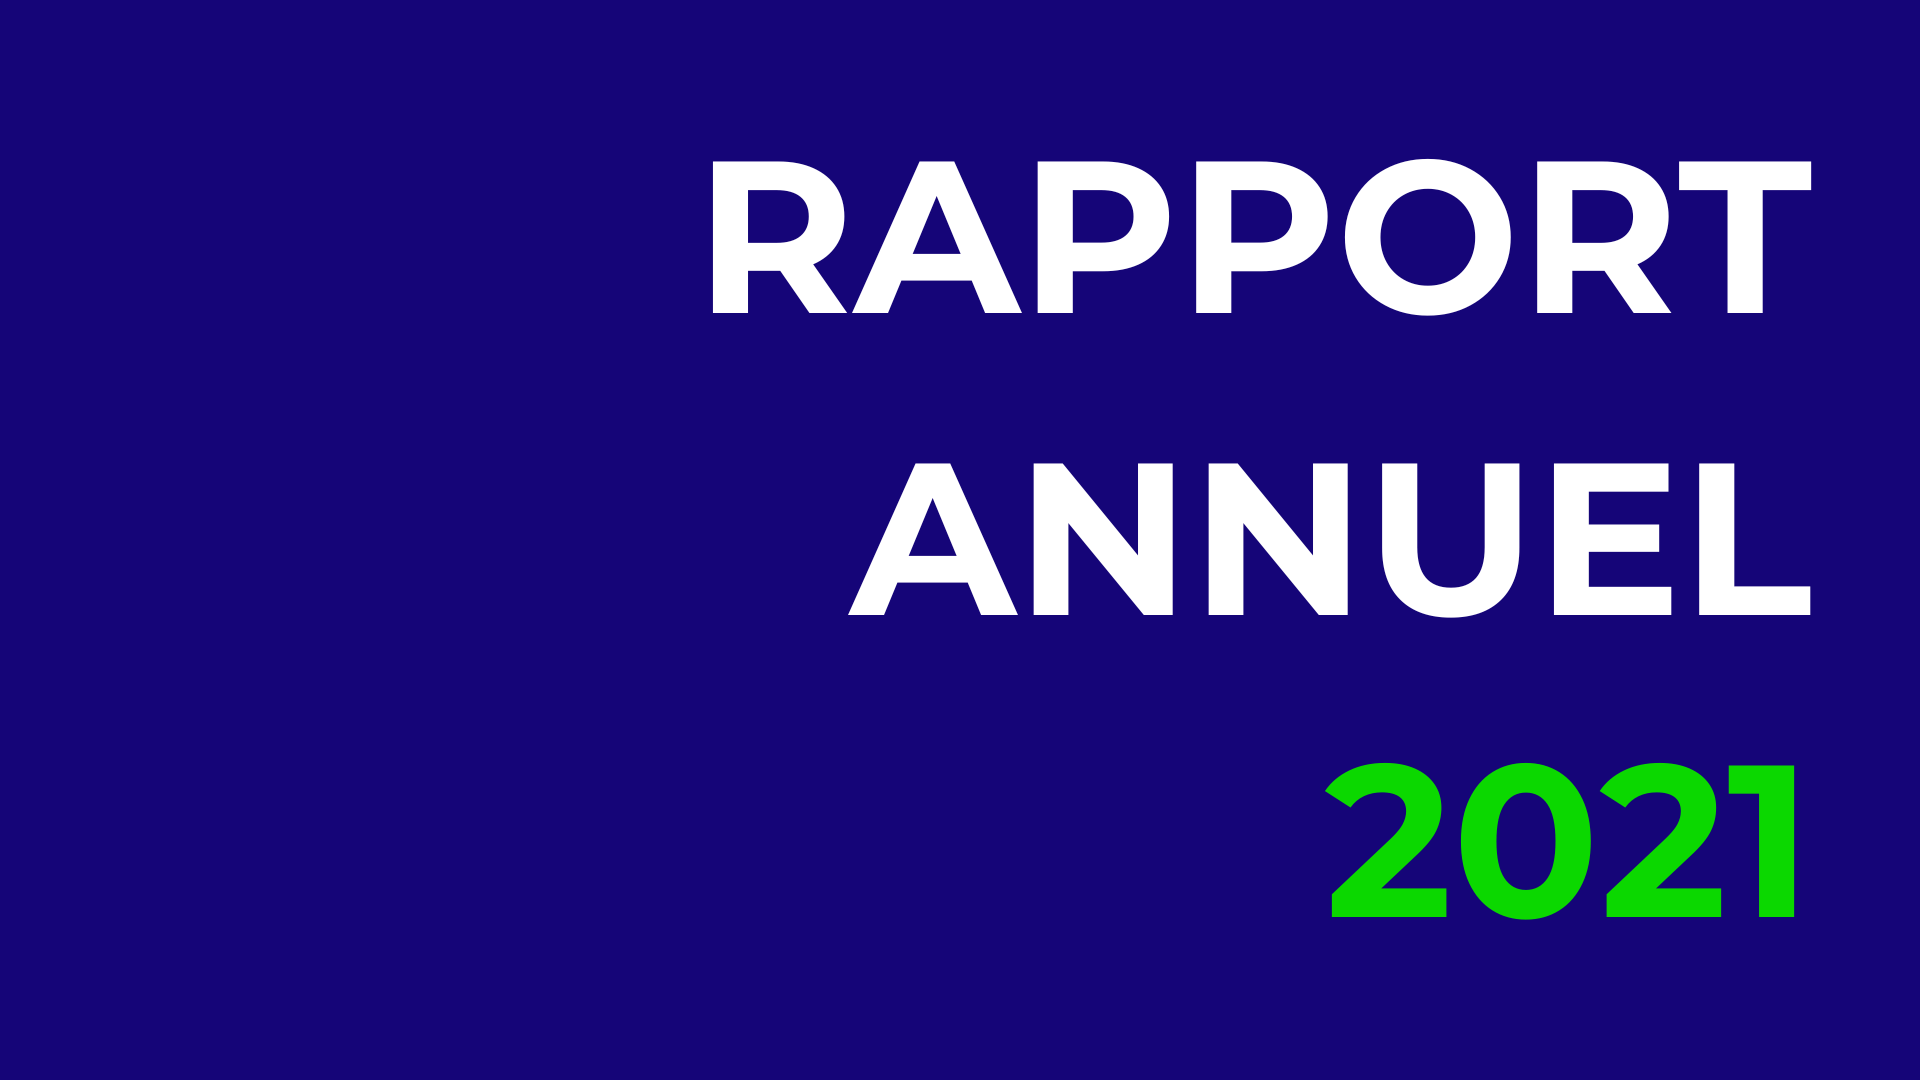 You are currently viewing Rapport annuel 2021 du ‎SIAO 67  ‎ ‎ ‎ ‎ ‎ ‎ ‎ ‎ ‎ ‎ ‎ ‎ ‎ ‎ ‎ ‎ ‎ ‎ ‎ ‎ ‎ ‎ ‎ ‎ ‎ ‎ ‎ ‎ ‎ ‎